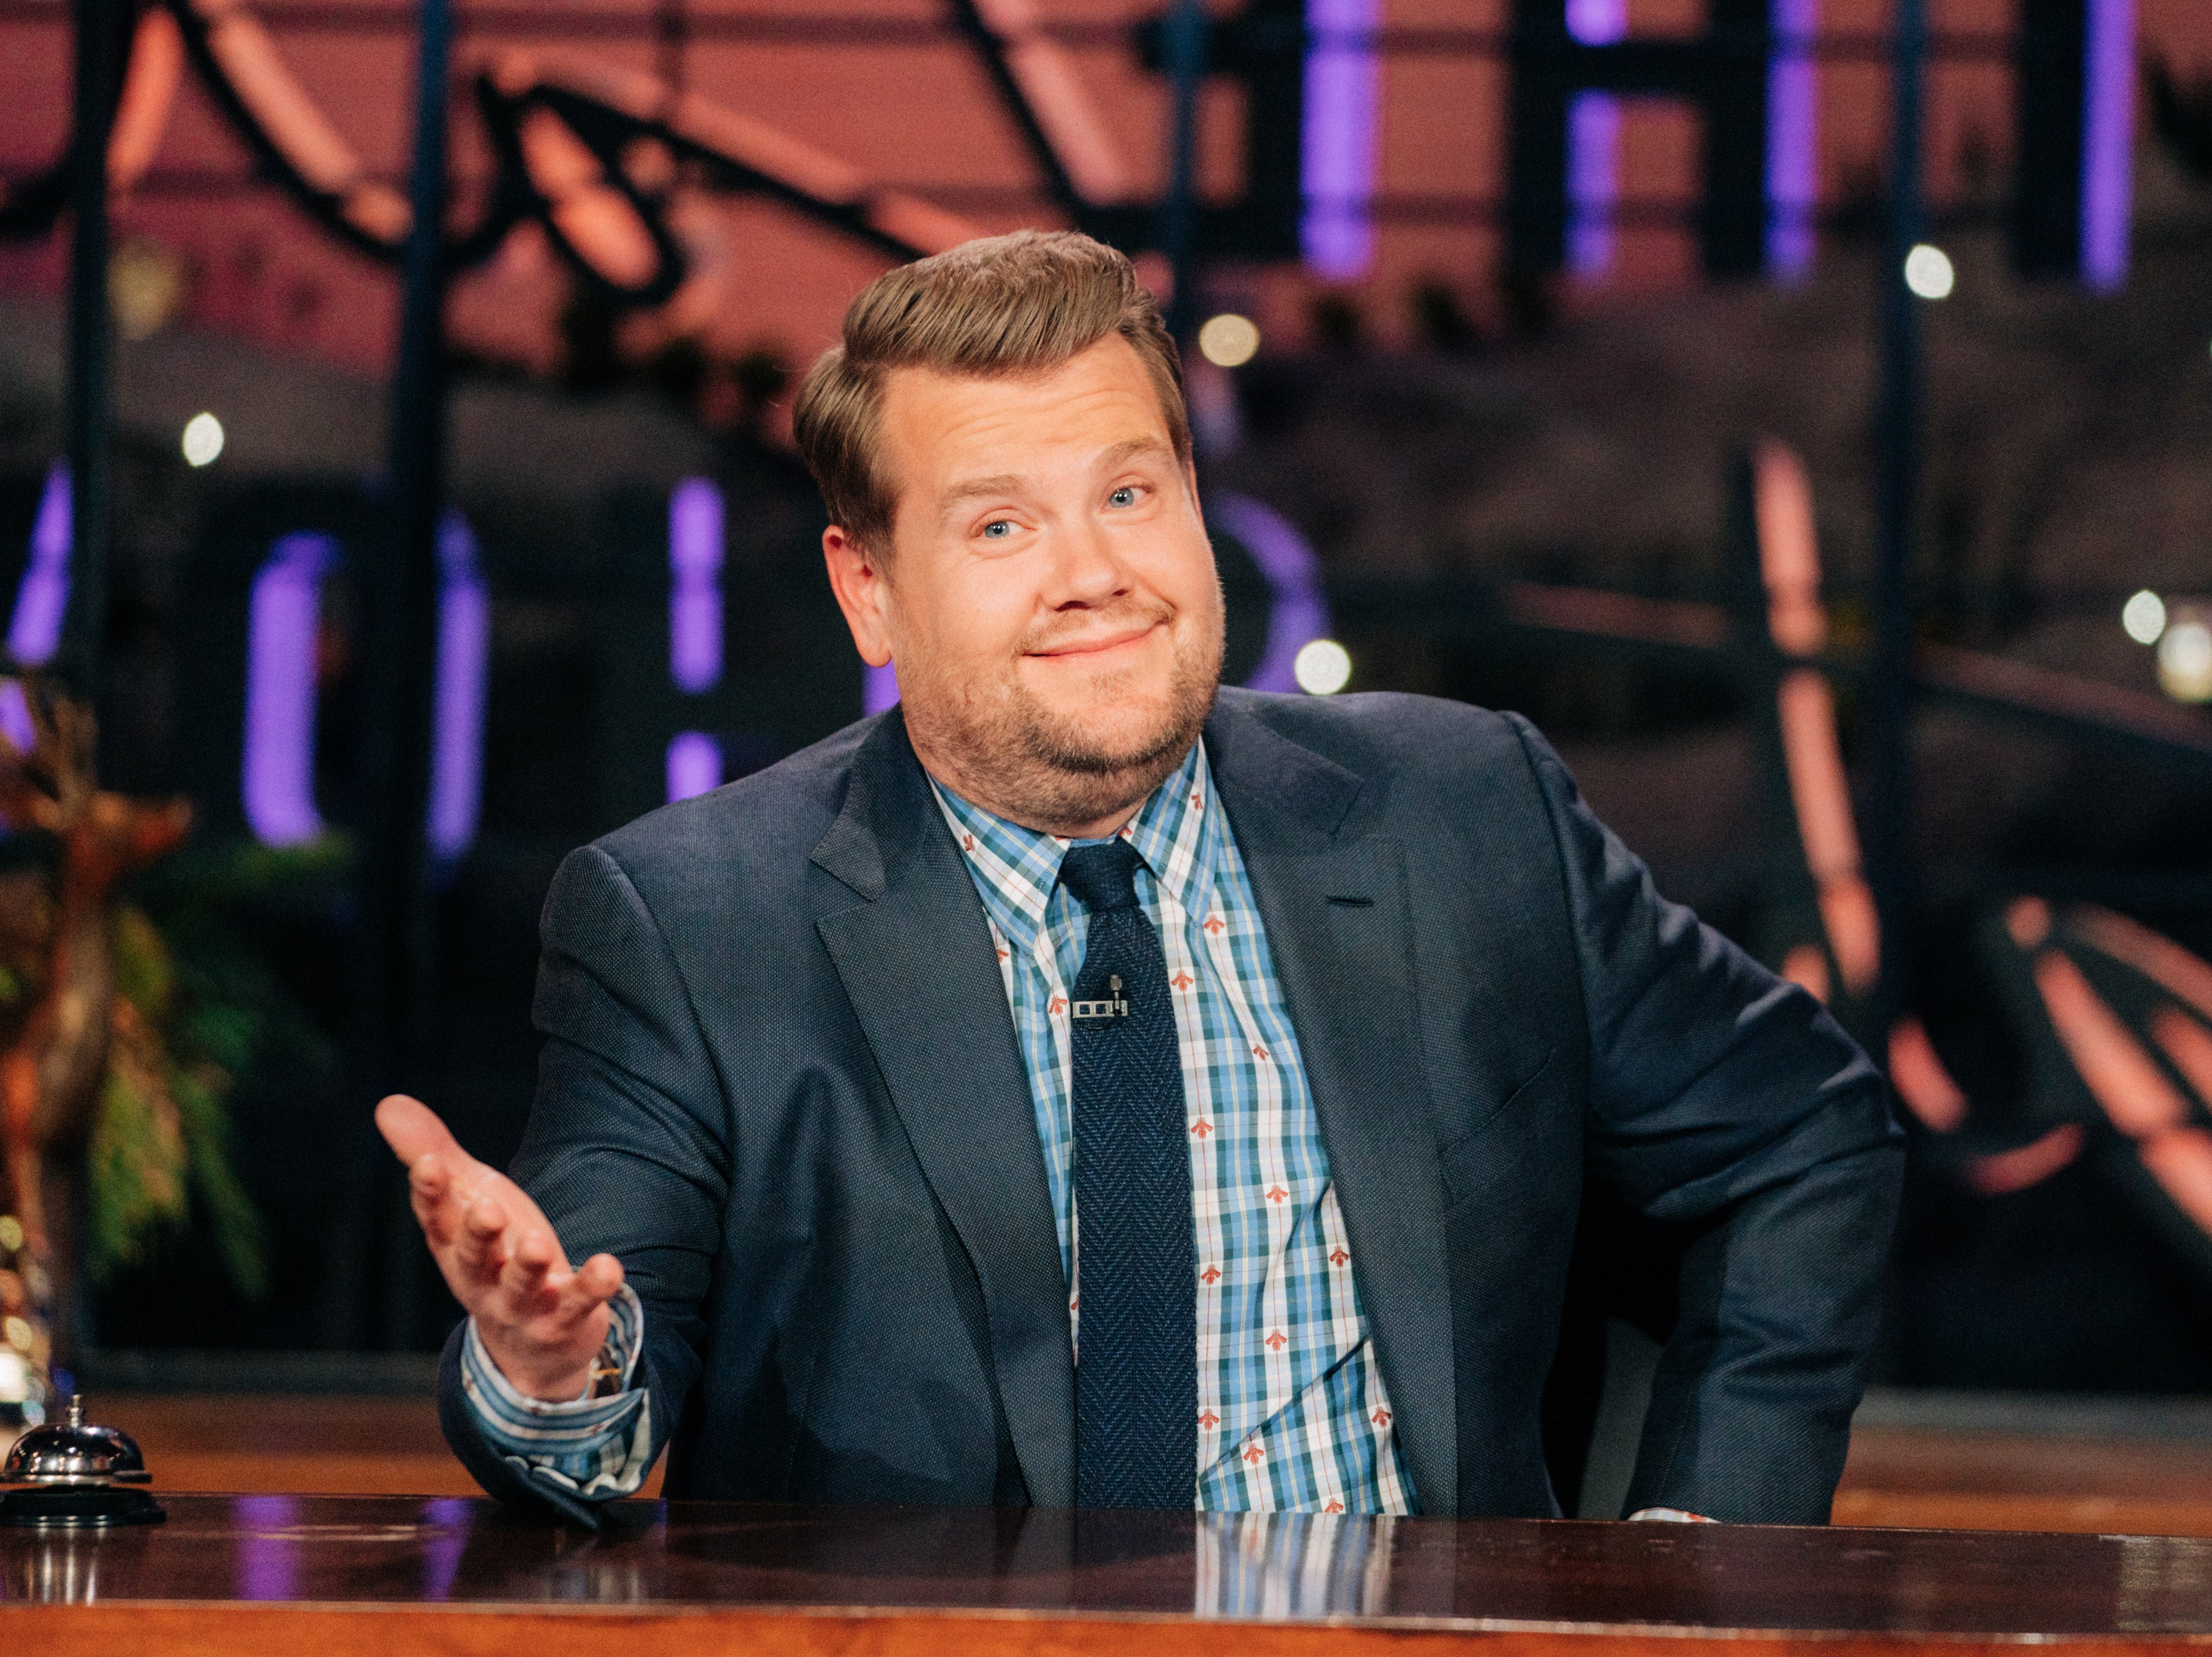 James Corden has also been the subject of criticism – albeit not from his ‘Late Late Show’ colleagues